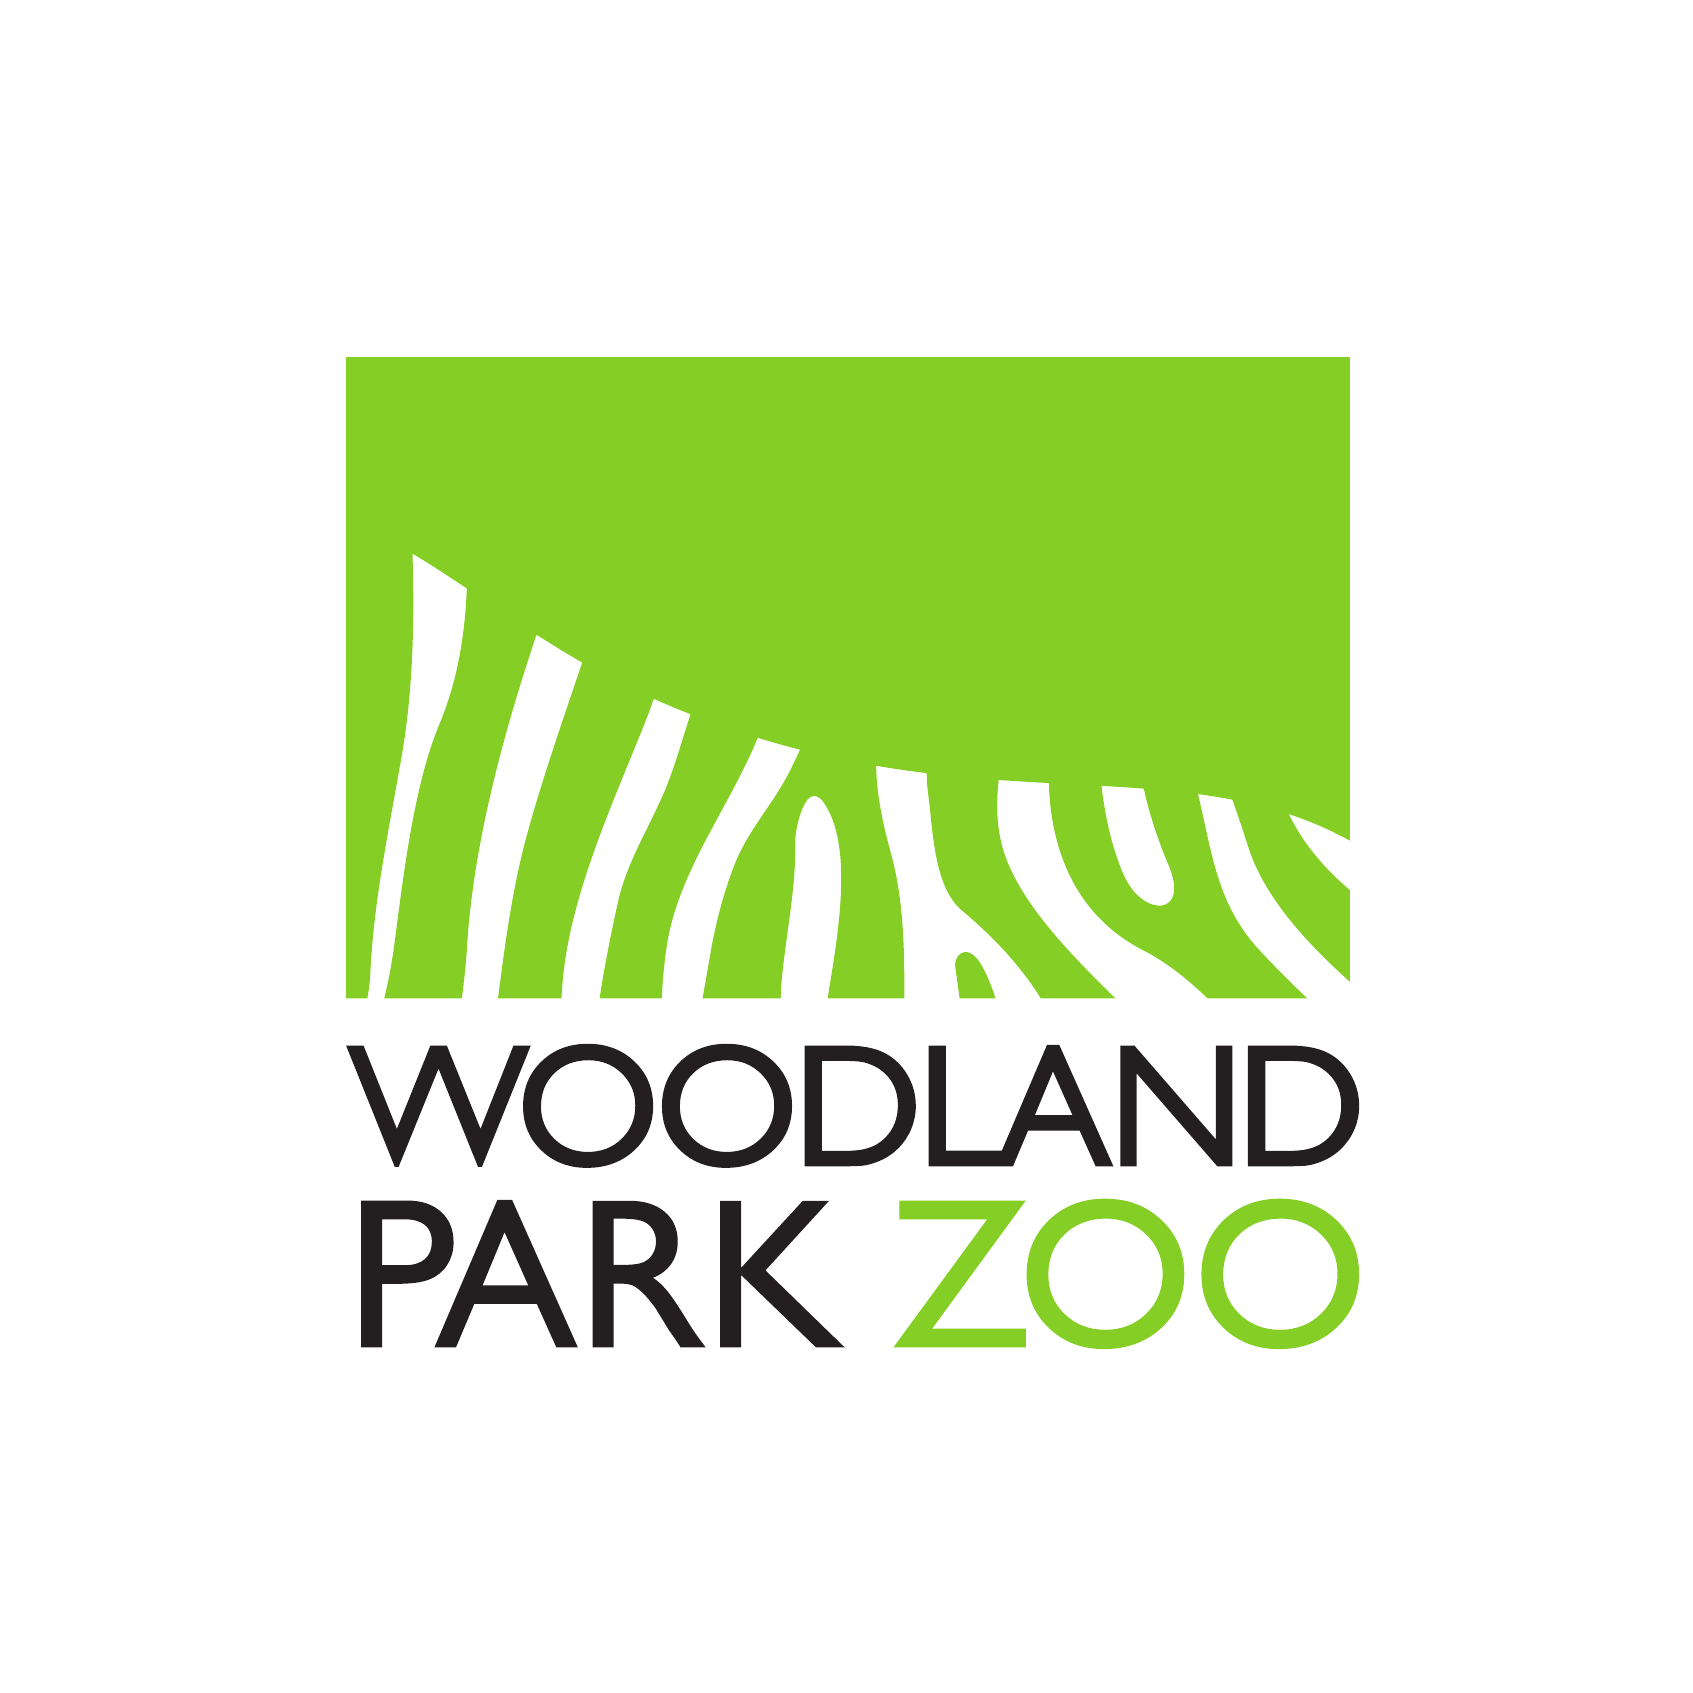 Woodland Park Zoo|Museums|Travel